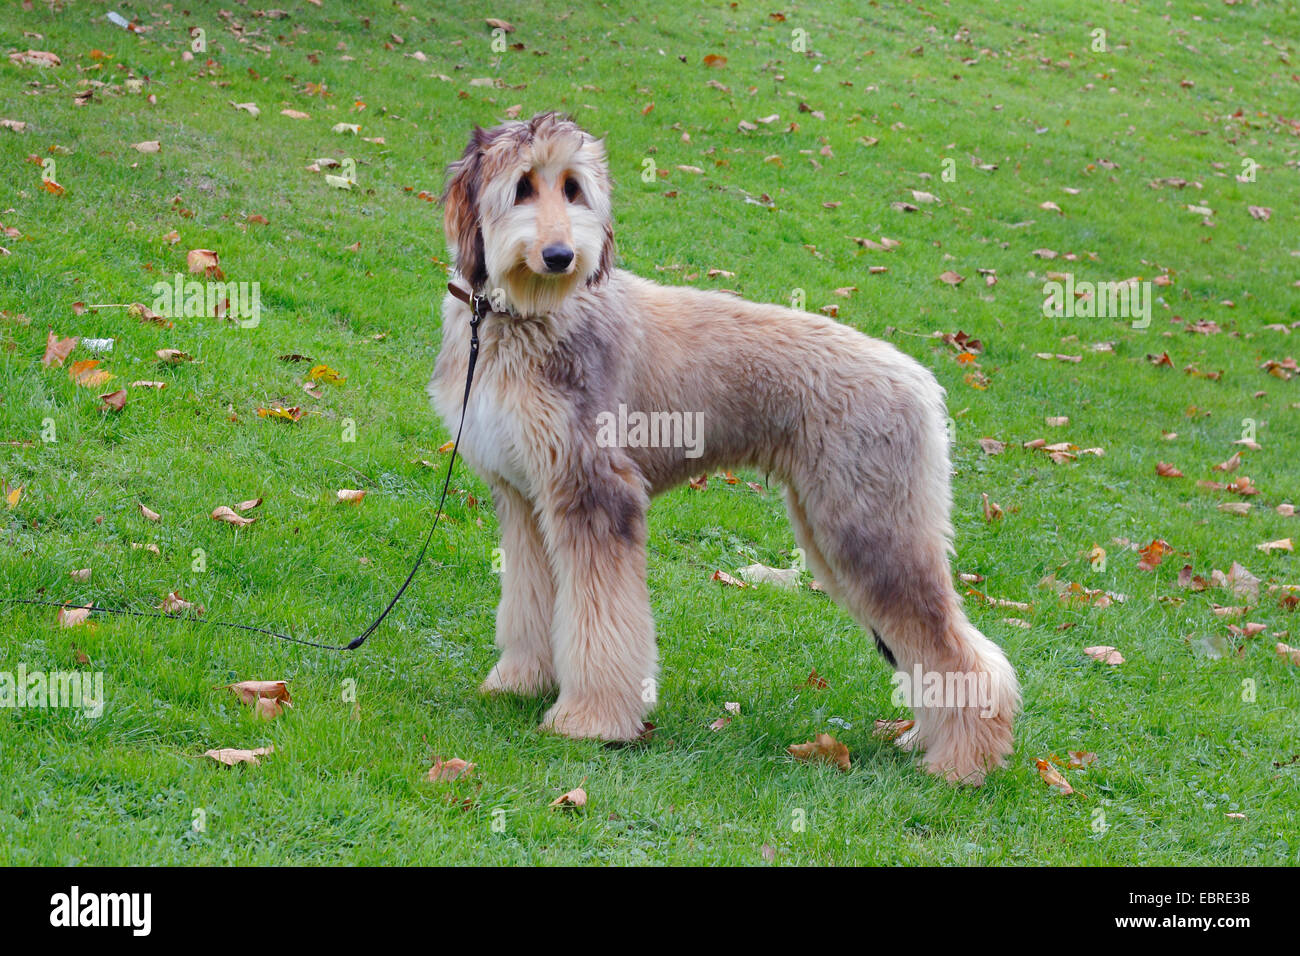 Afghanistan Hound, Afghan Hound (Canis lupus f. familiaris), six month old Afghan Hound stands in a meadow Stock Photo